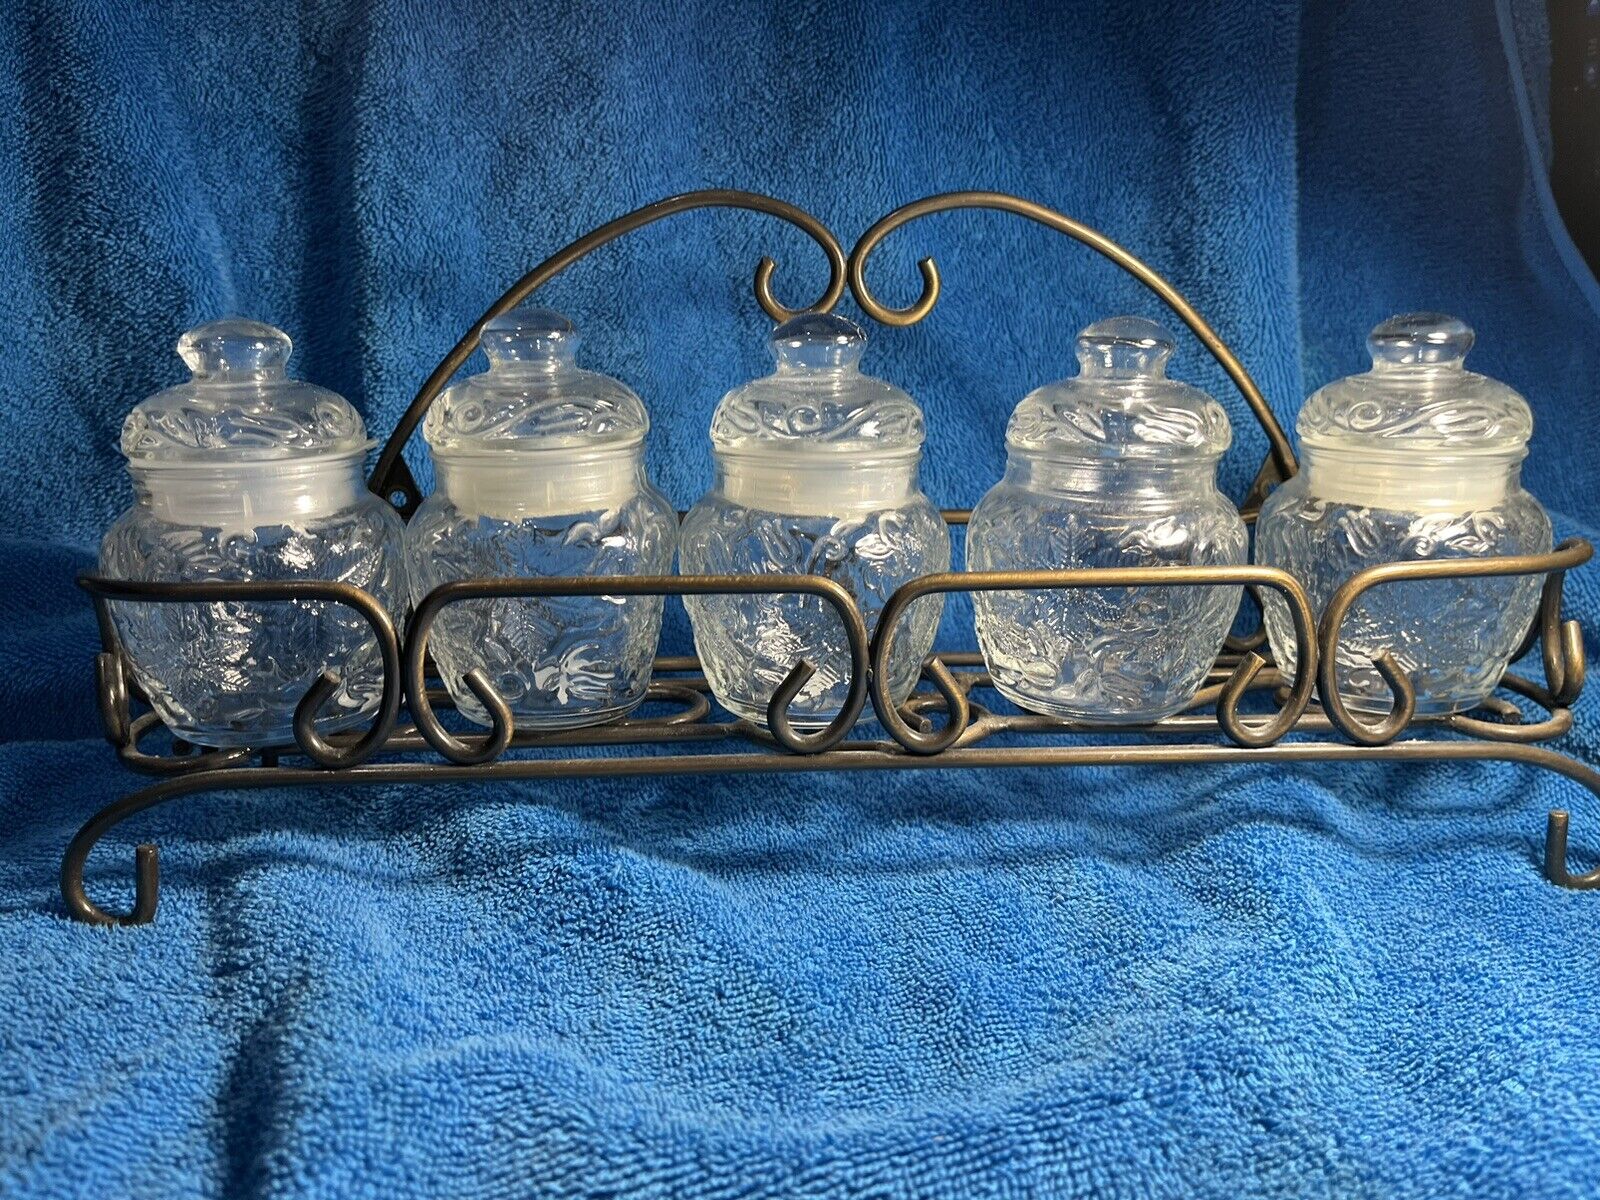 Princess House Fantasia Spice Rack With 5 Spice Jars And Lids